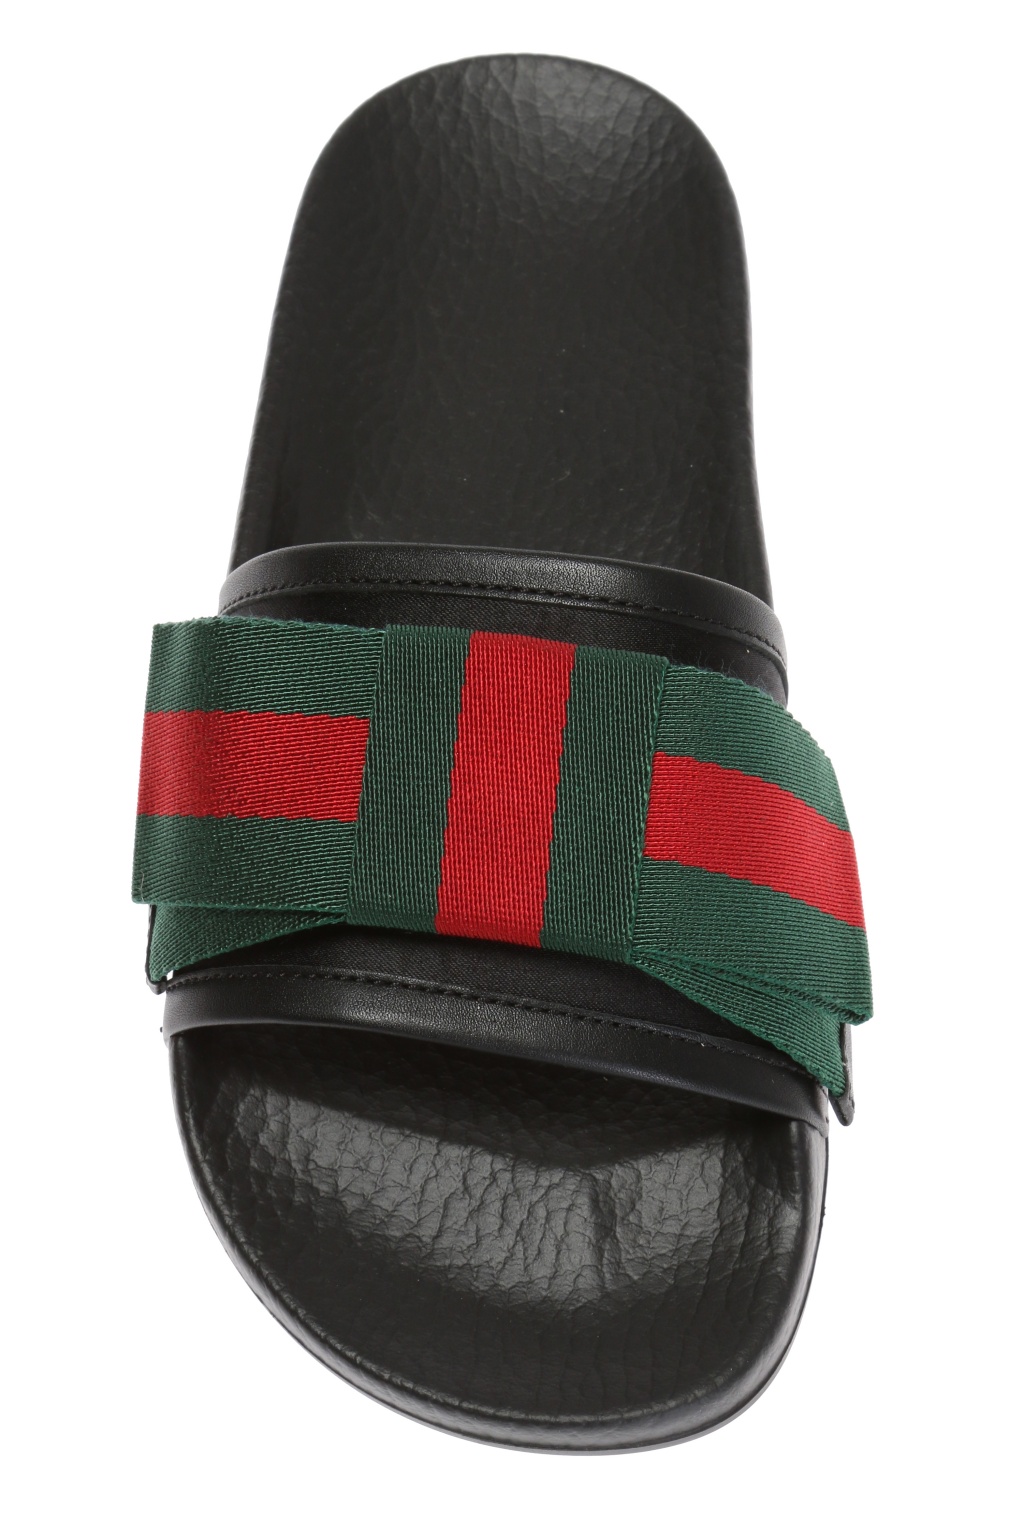 gucci leather sliders